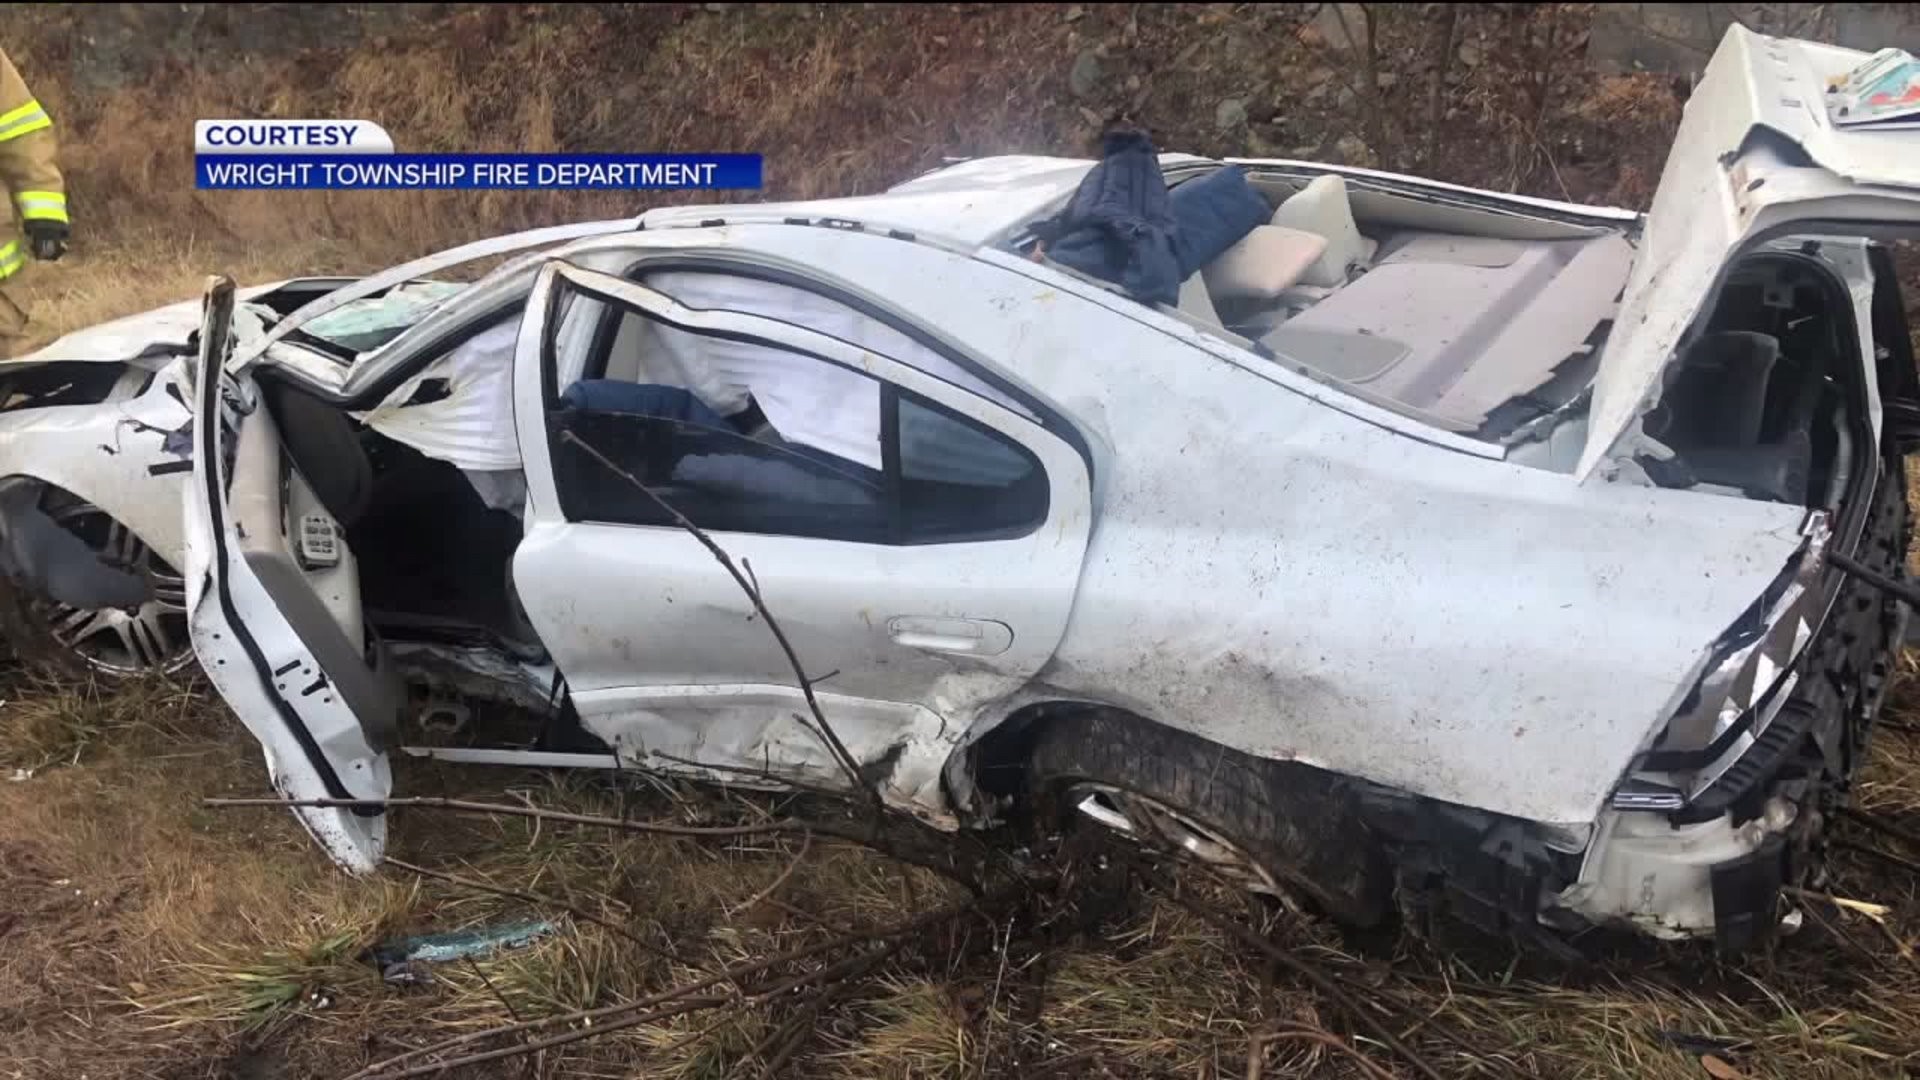 Only Minor Injuries After Car Crash Near Mountain Top